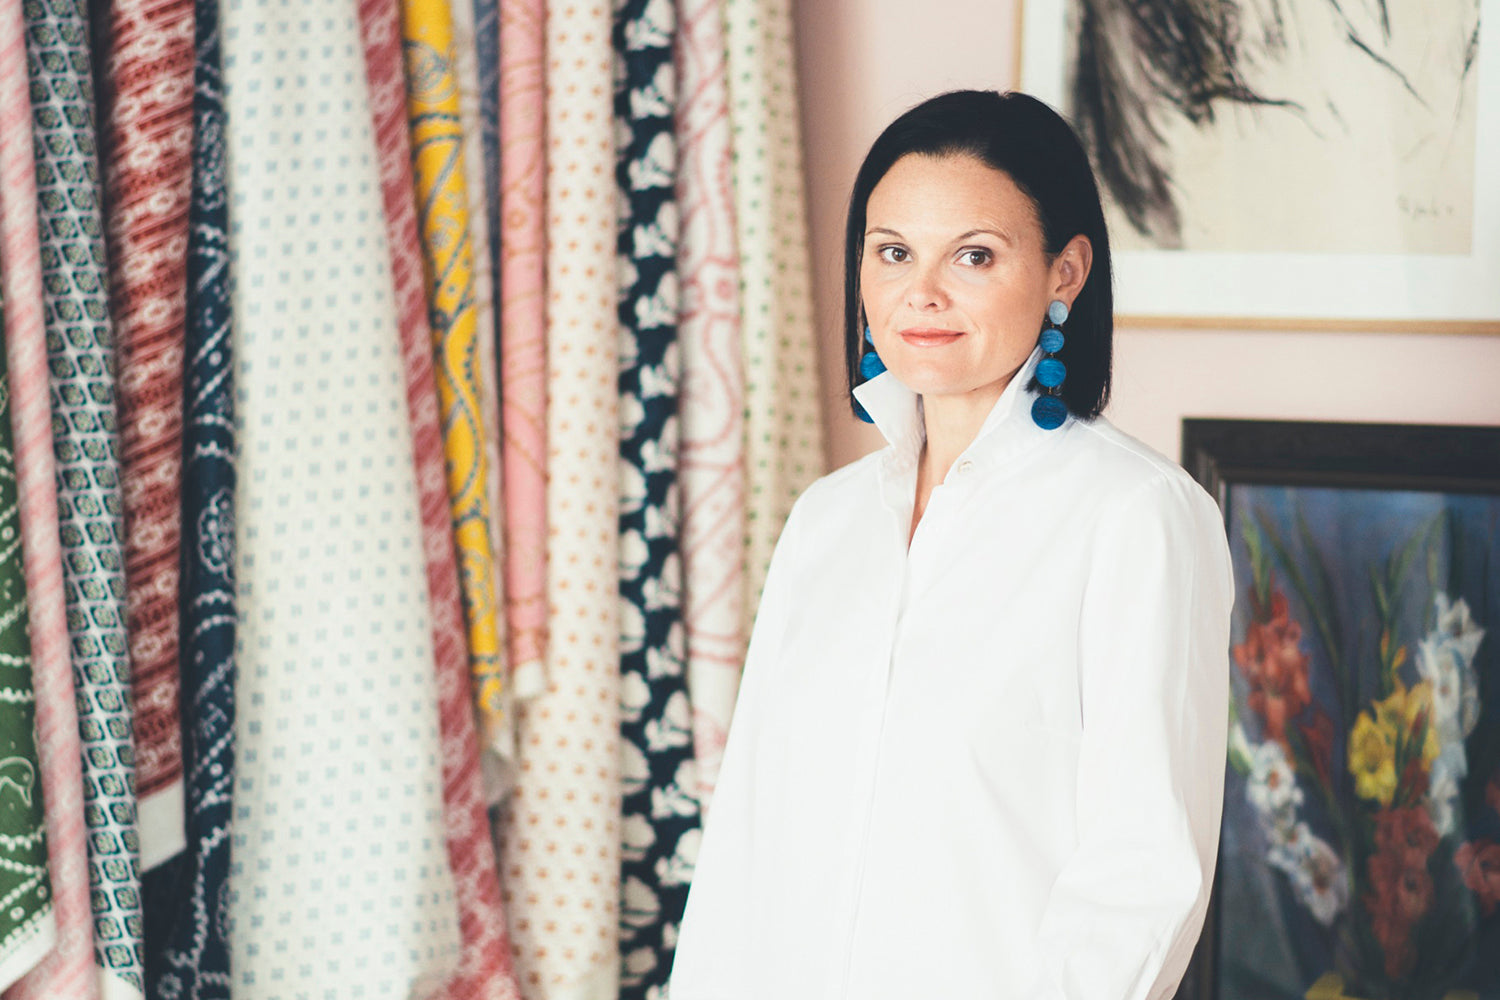 Brunette woman in an oversize white button down standing in front of a table covered in fabric swatches.